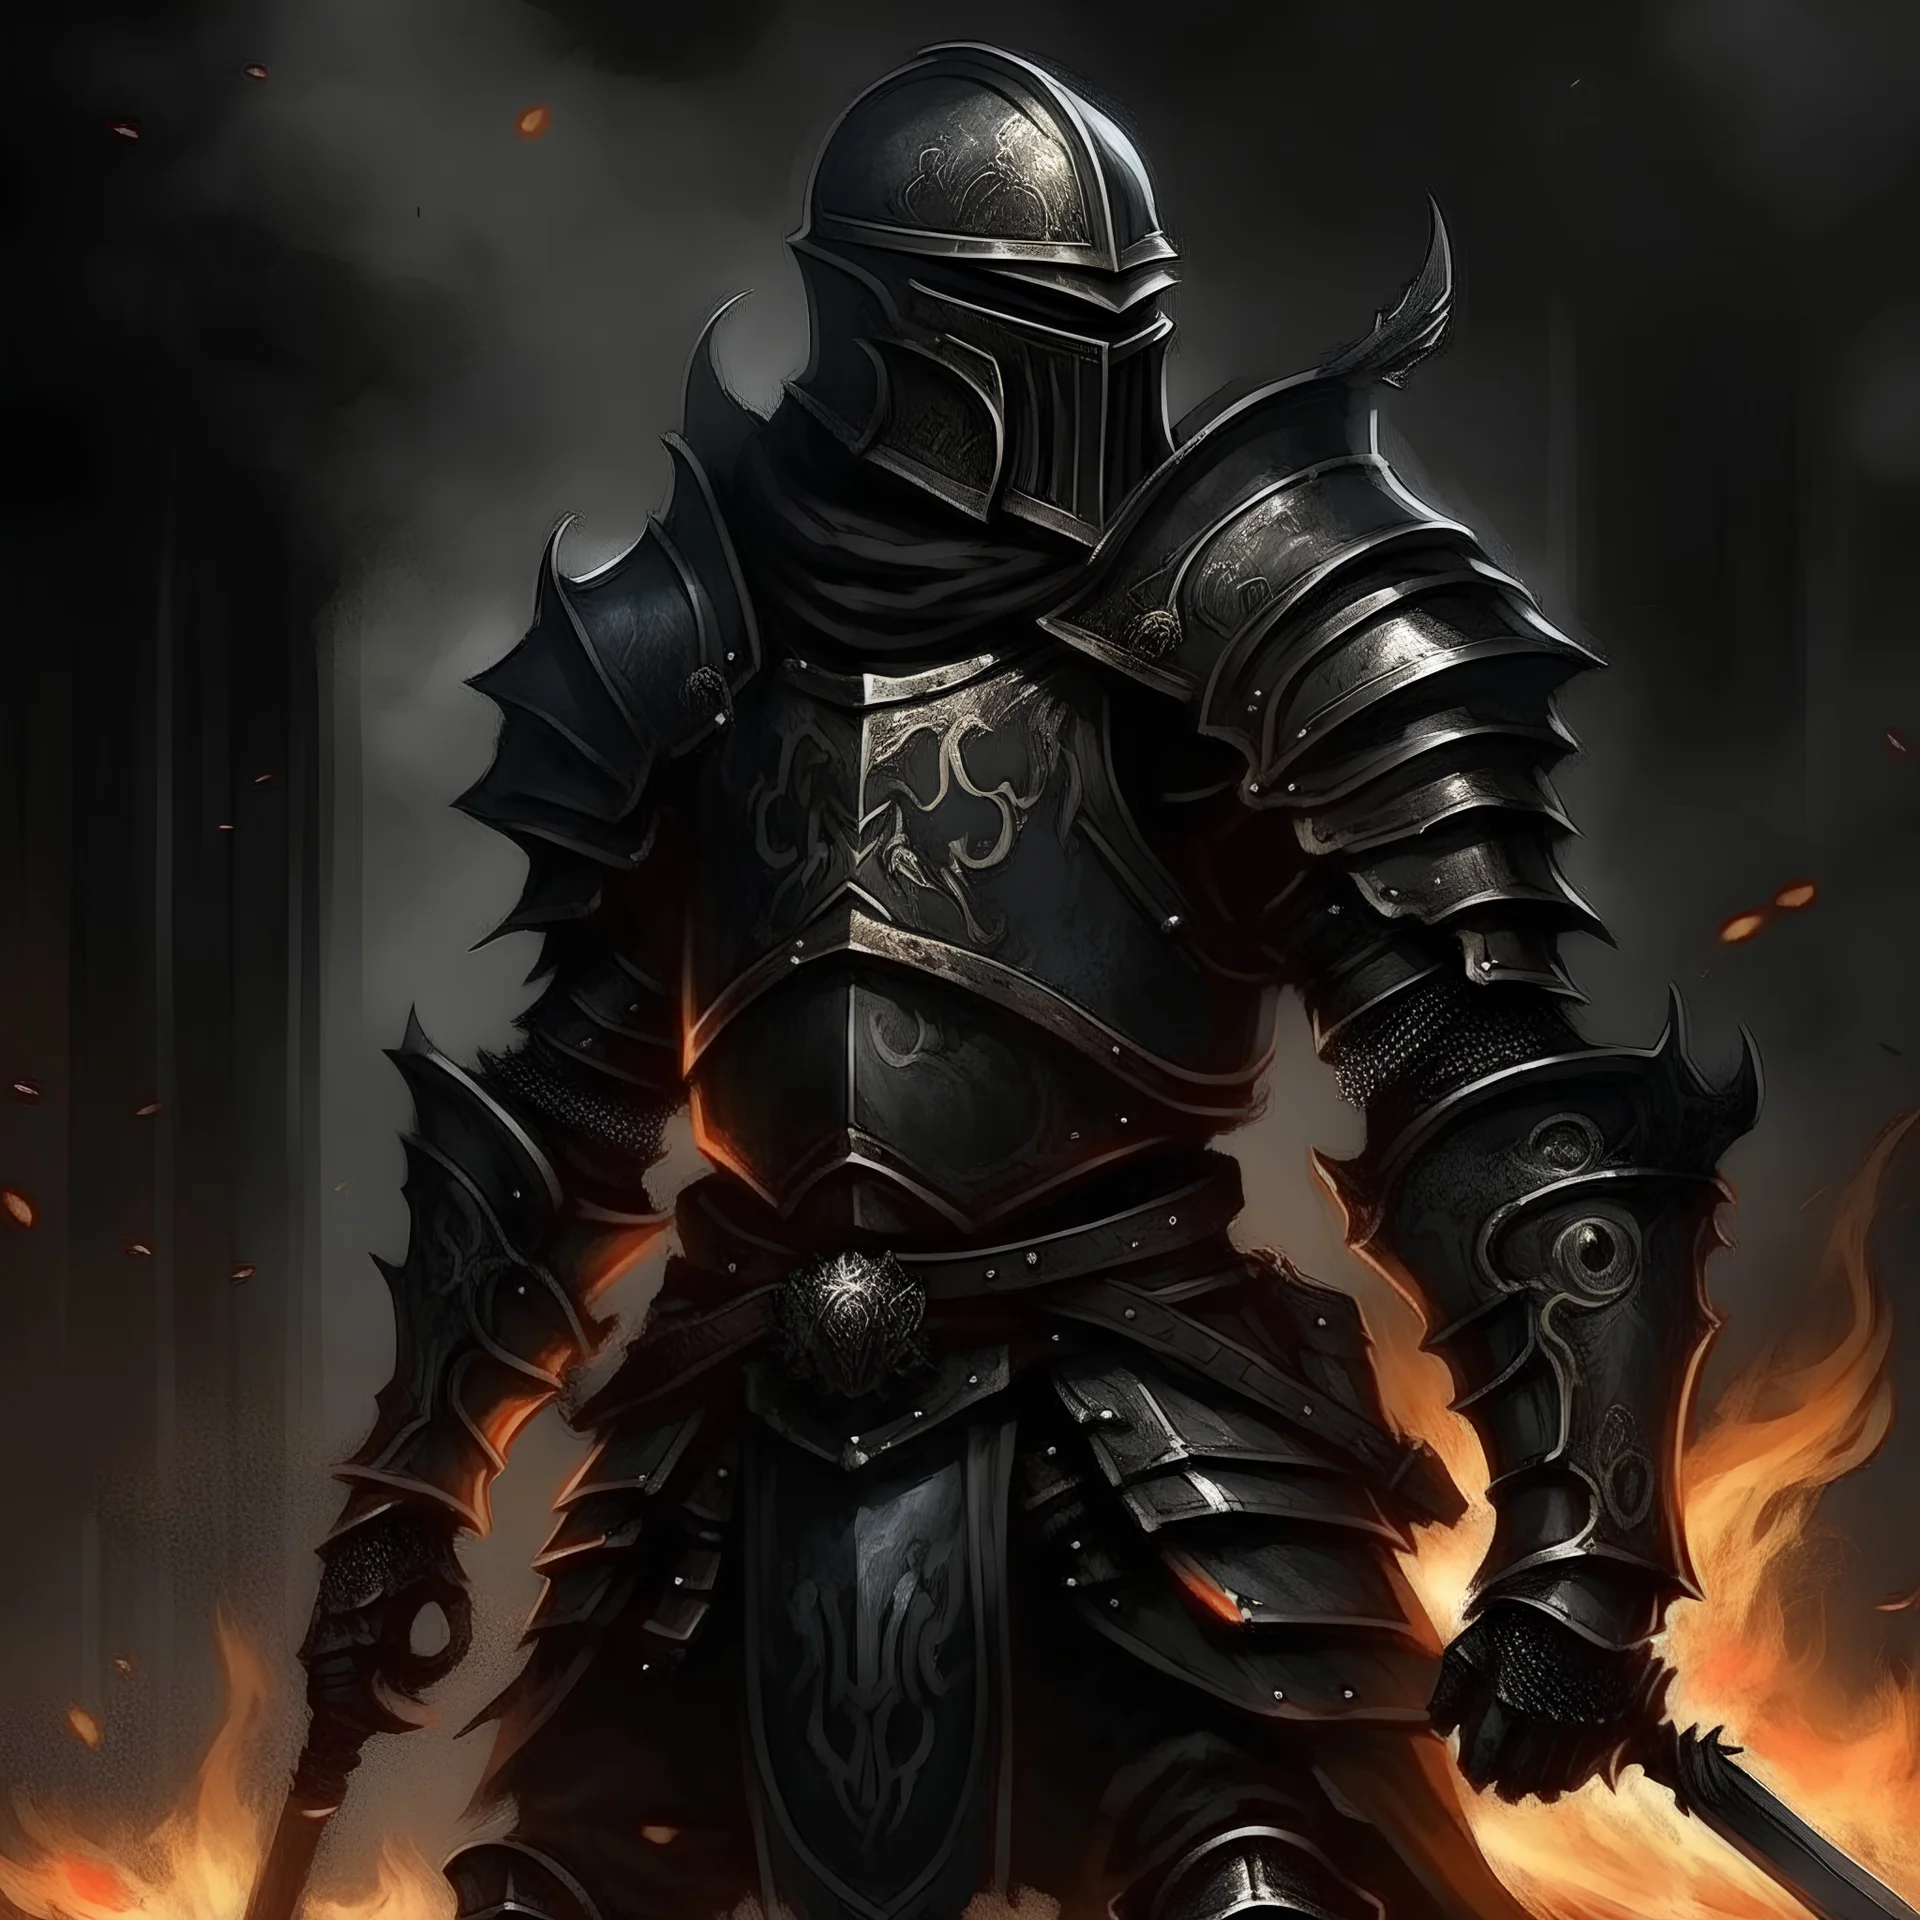 make a painting of a knight in black fire armor in the style of dark fantasy comics